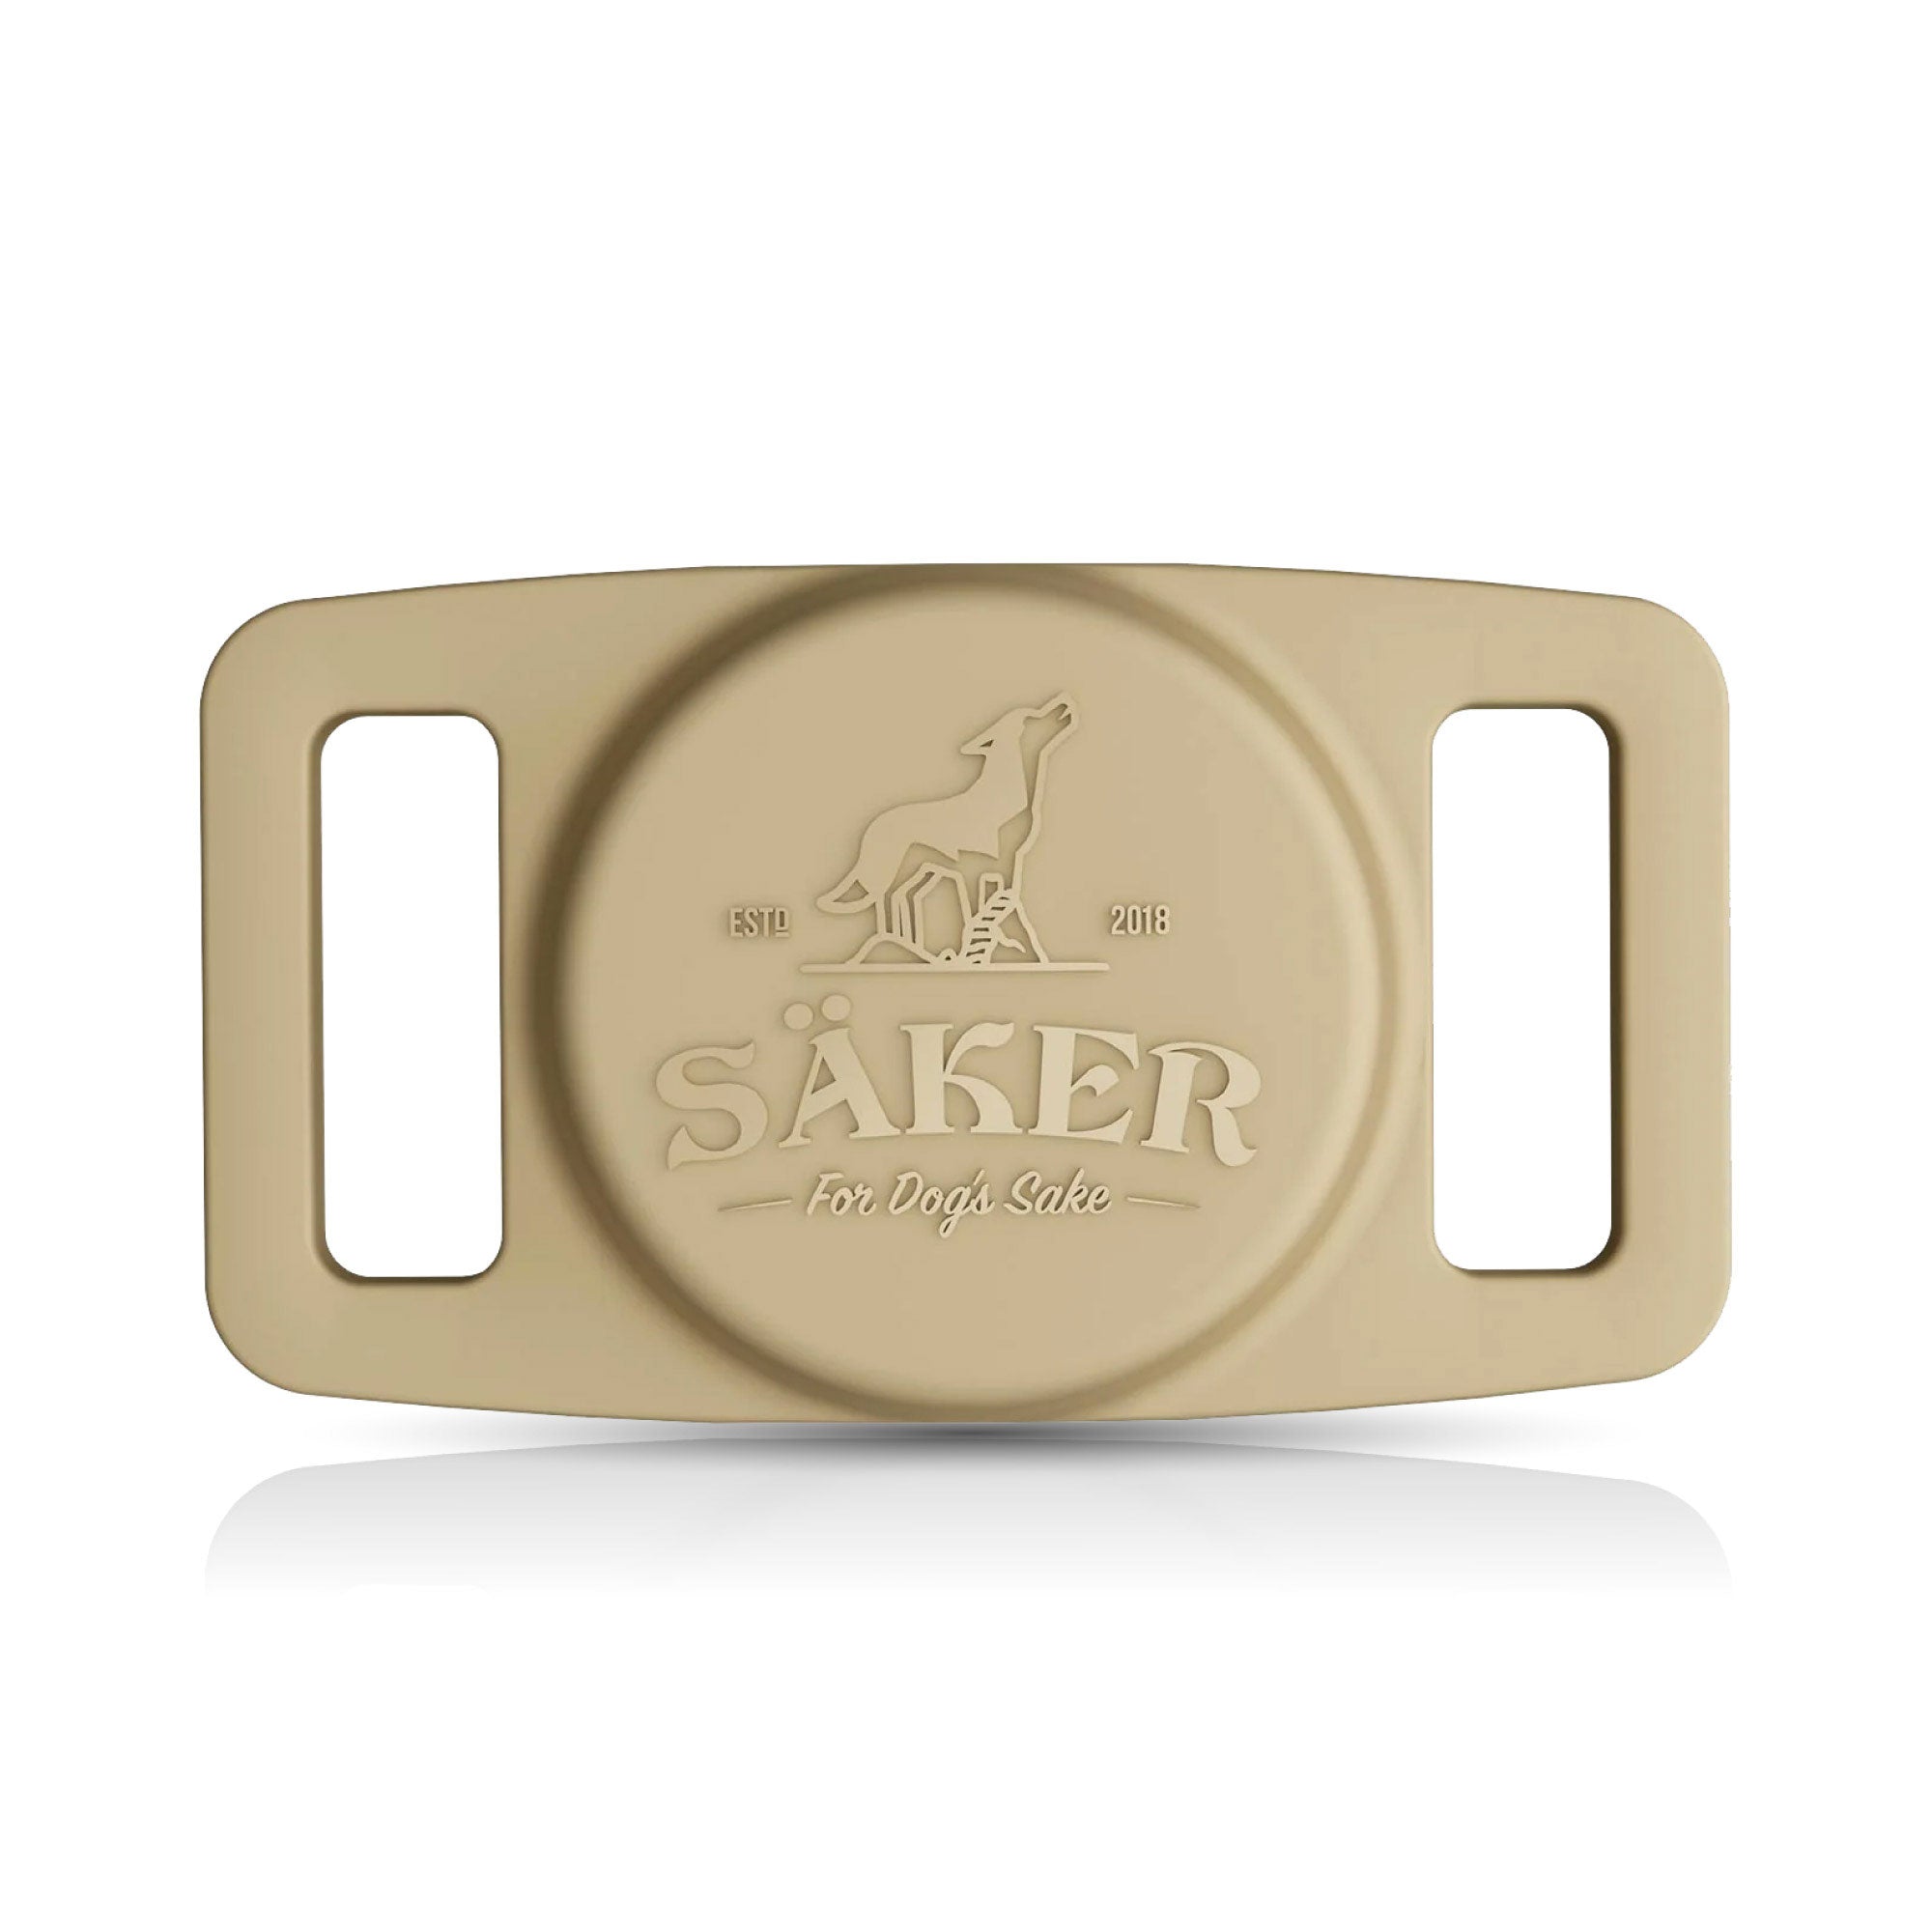 Main image of the Mammoth Airtag Holder in Sandstorm Tan